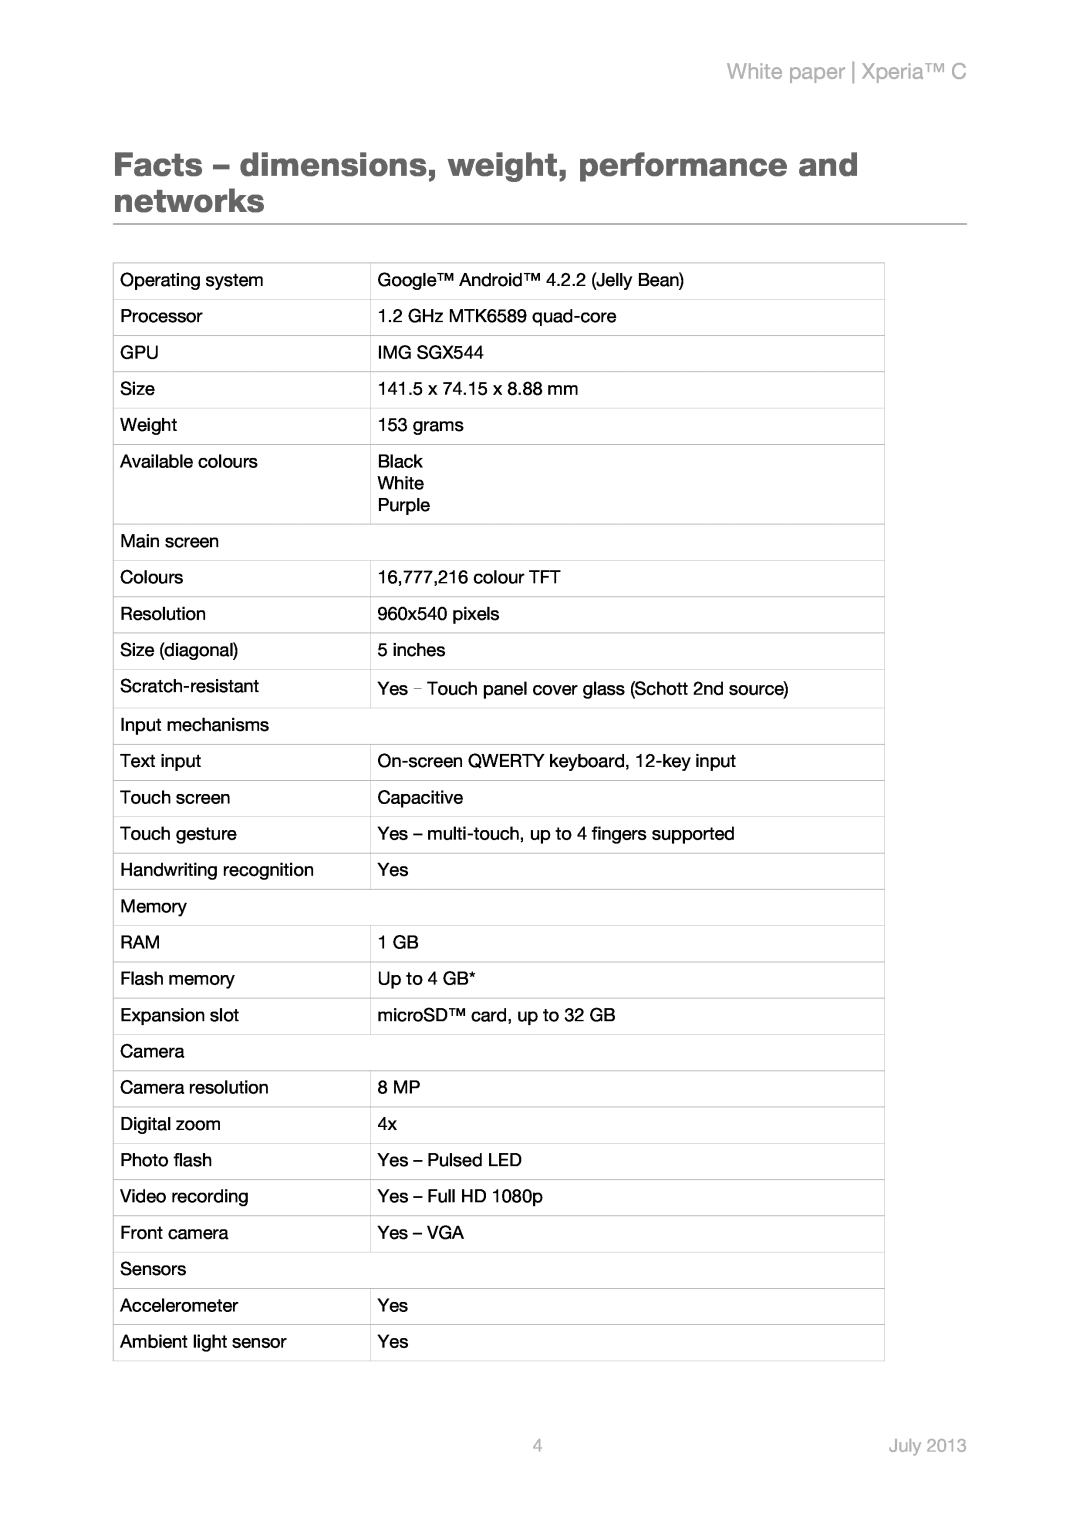 Sony s39h manual Facts - dimensions, weight, performance and networks, White paper Xperia C, July 